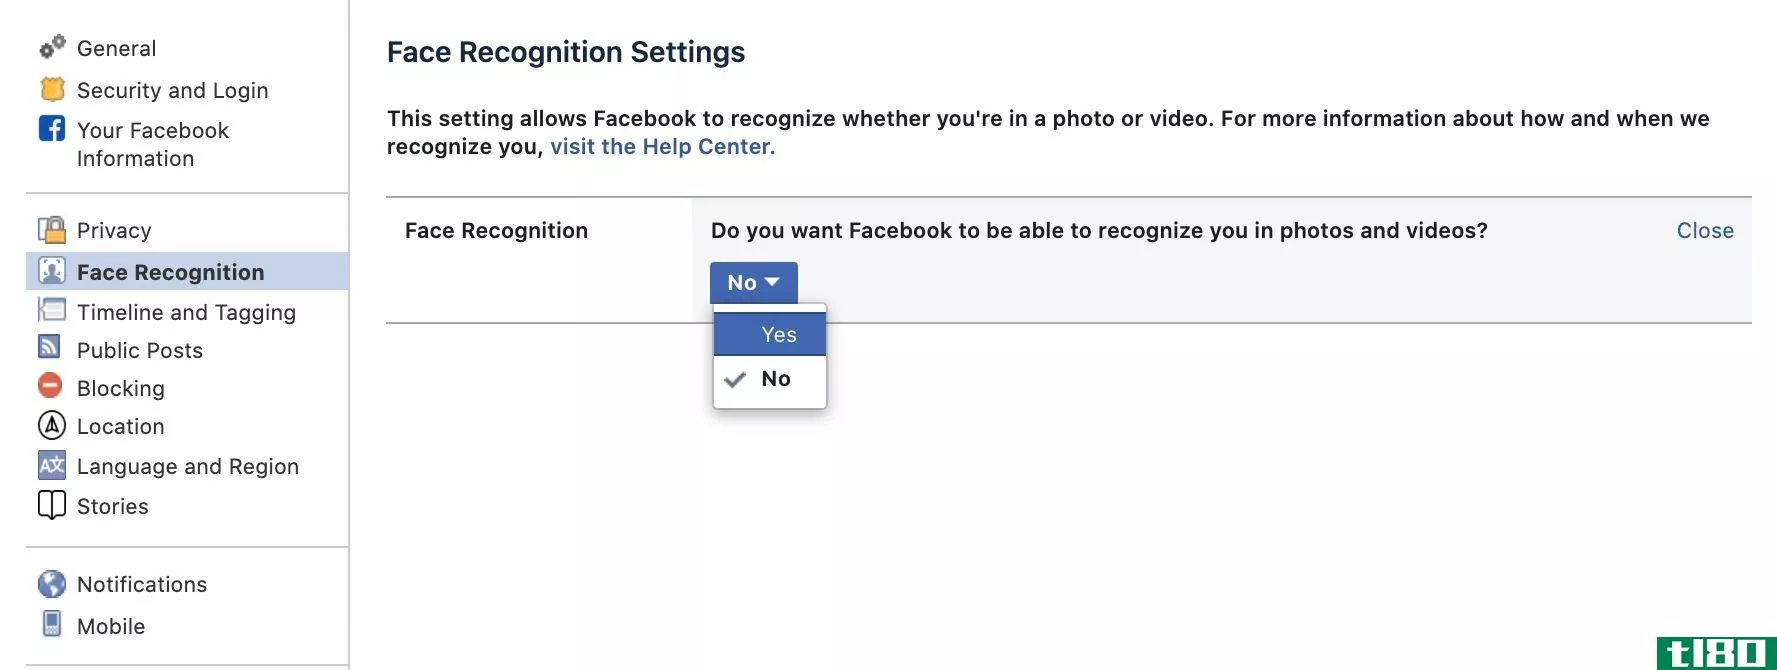 Facebook settings for facial recognition